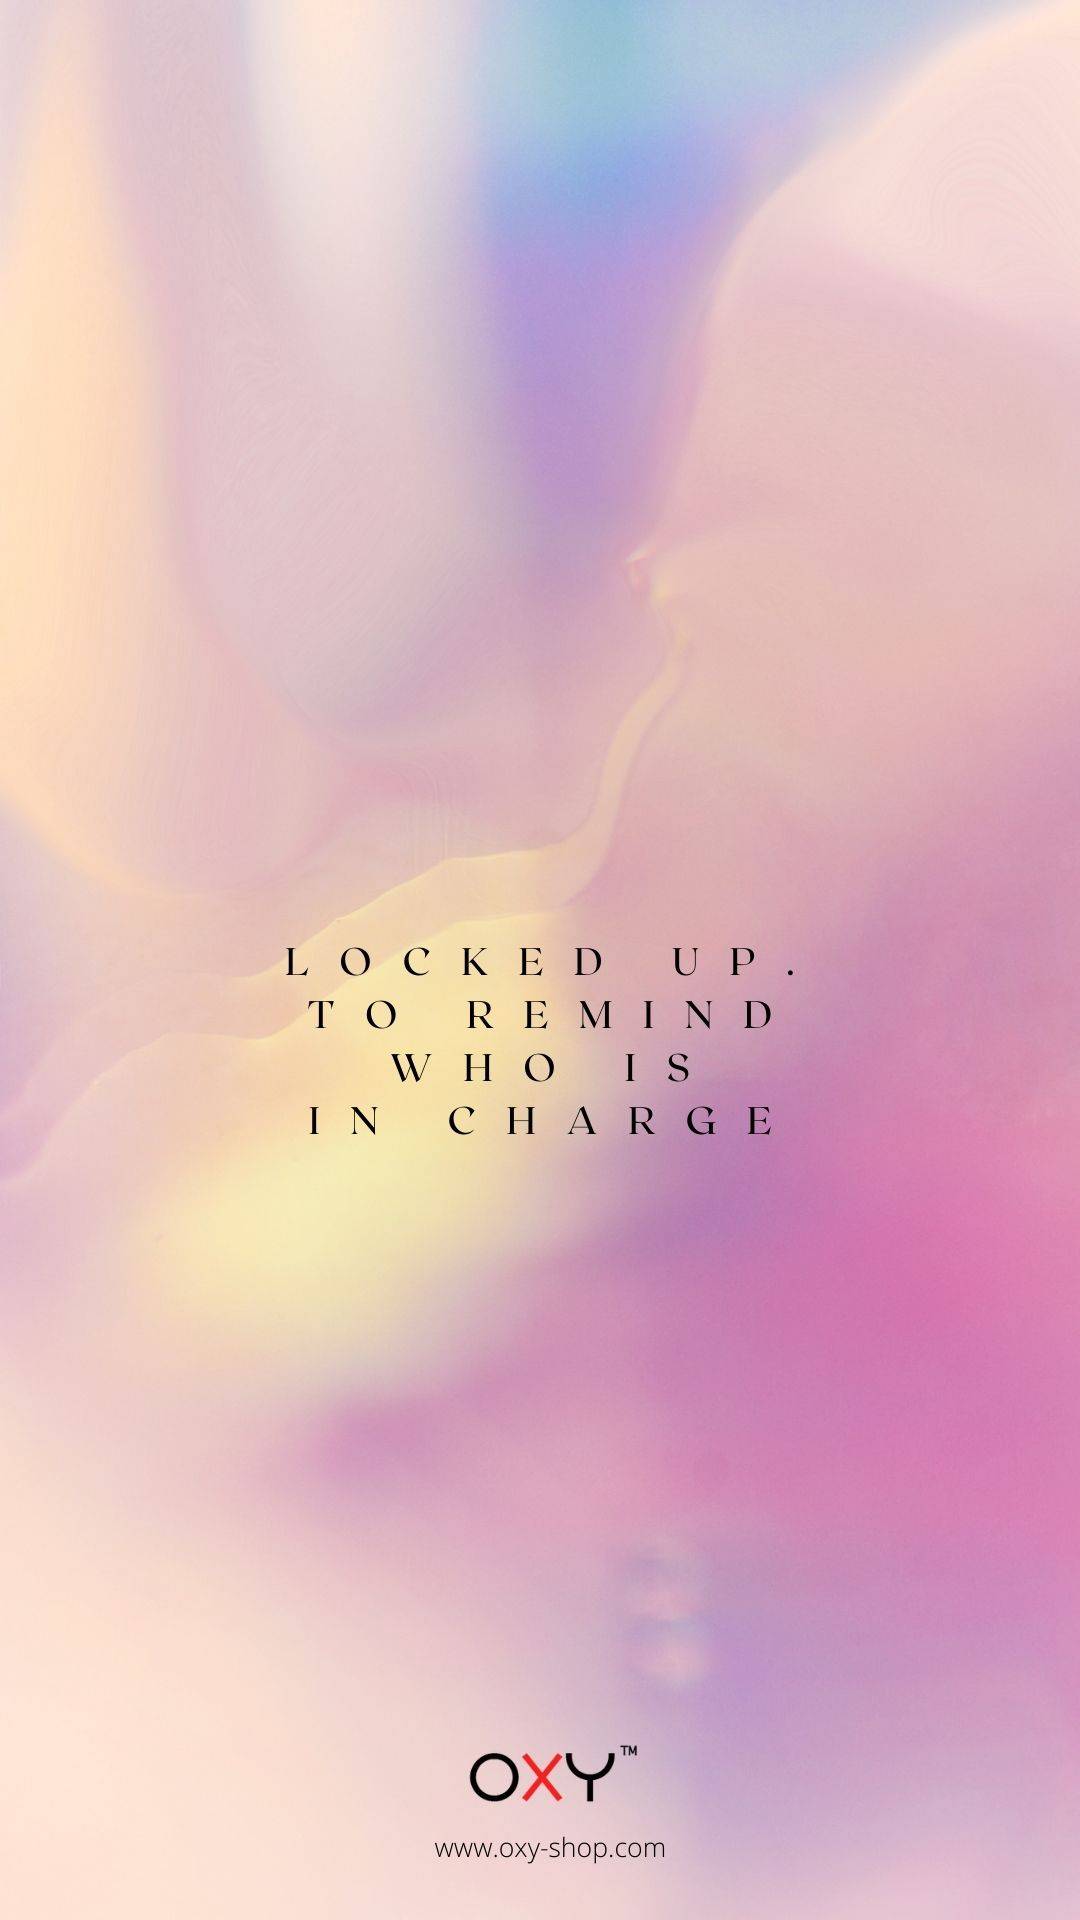 Locked up. To remind who is in charge. - BDSM wallpaper